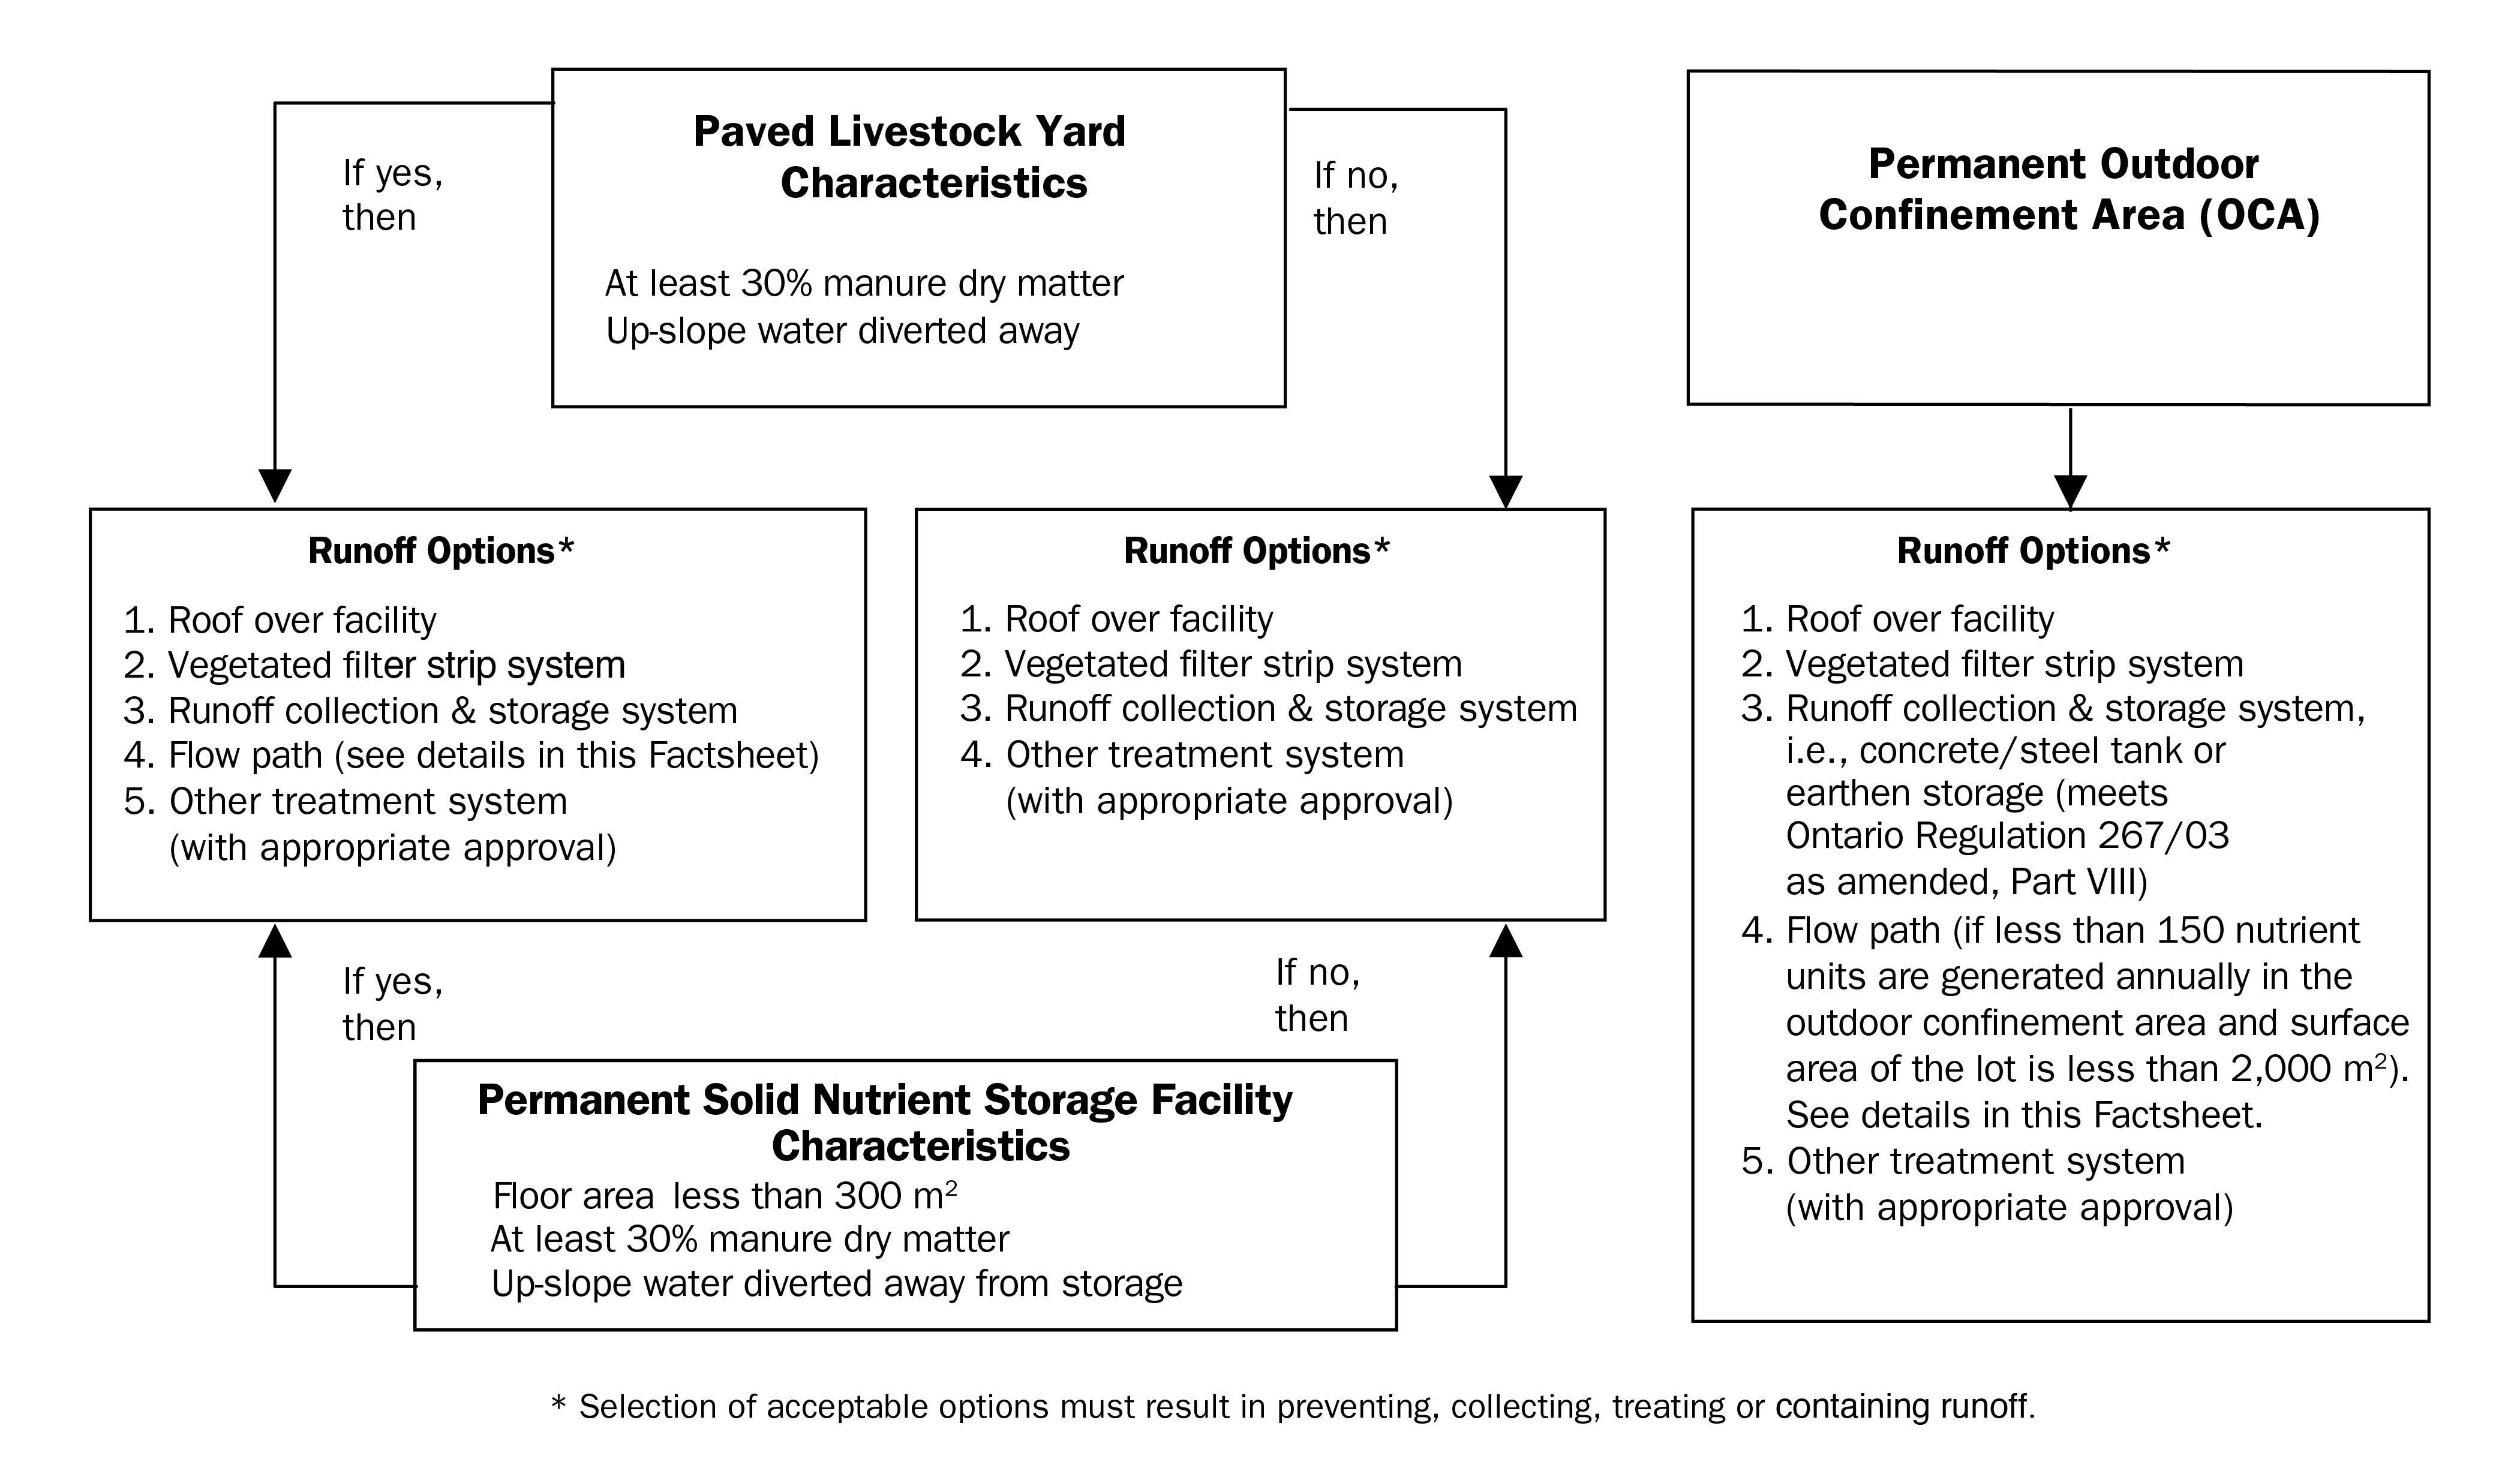 Overview of runoff options for permanent outdoor confinement areas, permanent solid nutrient storage facilities and paved livestock yards